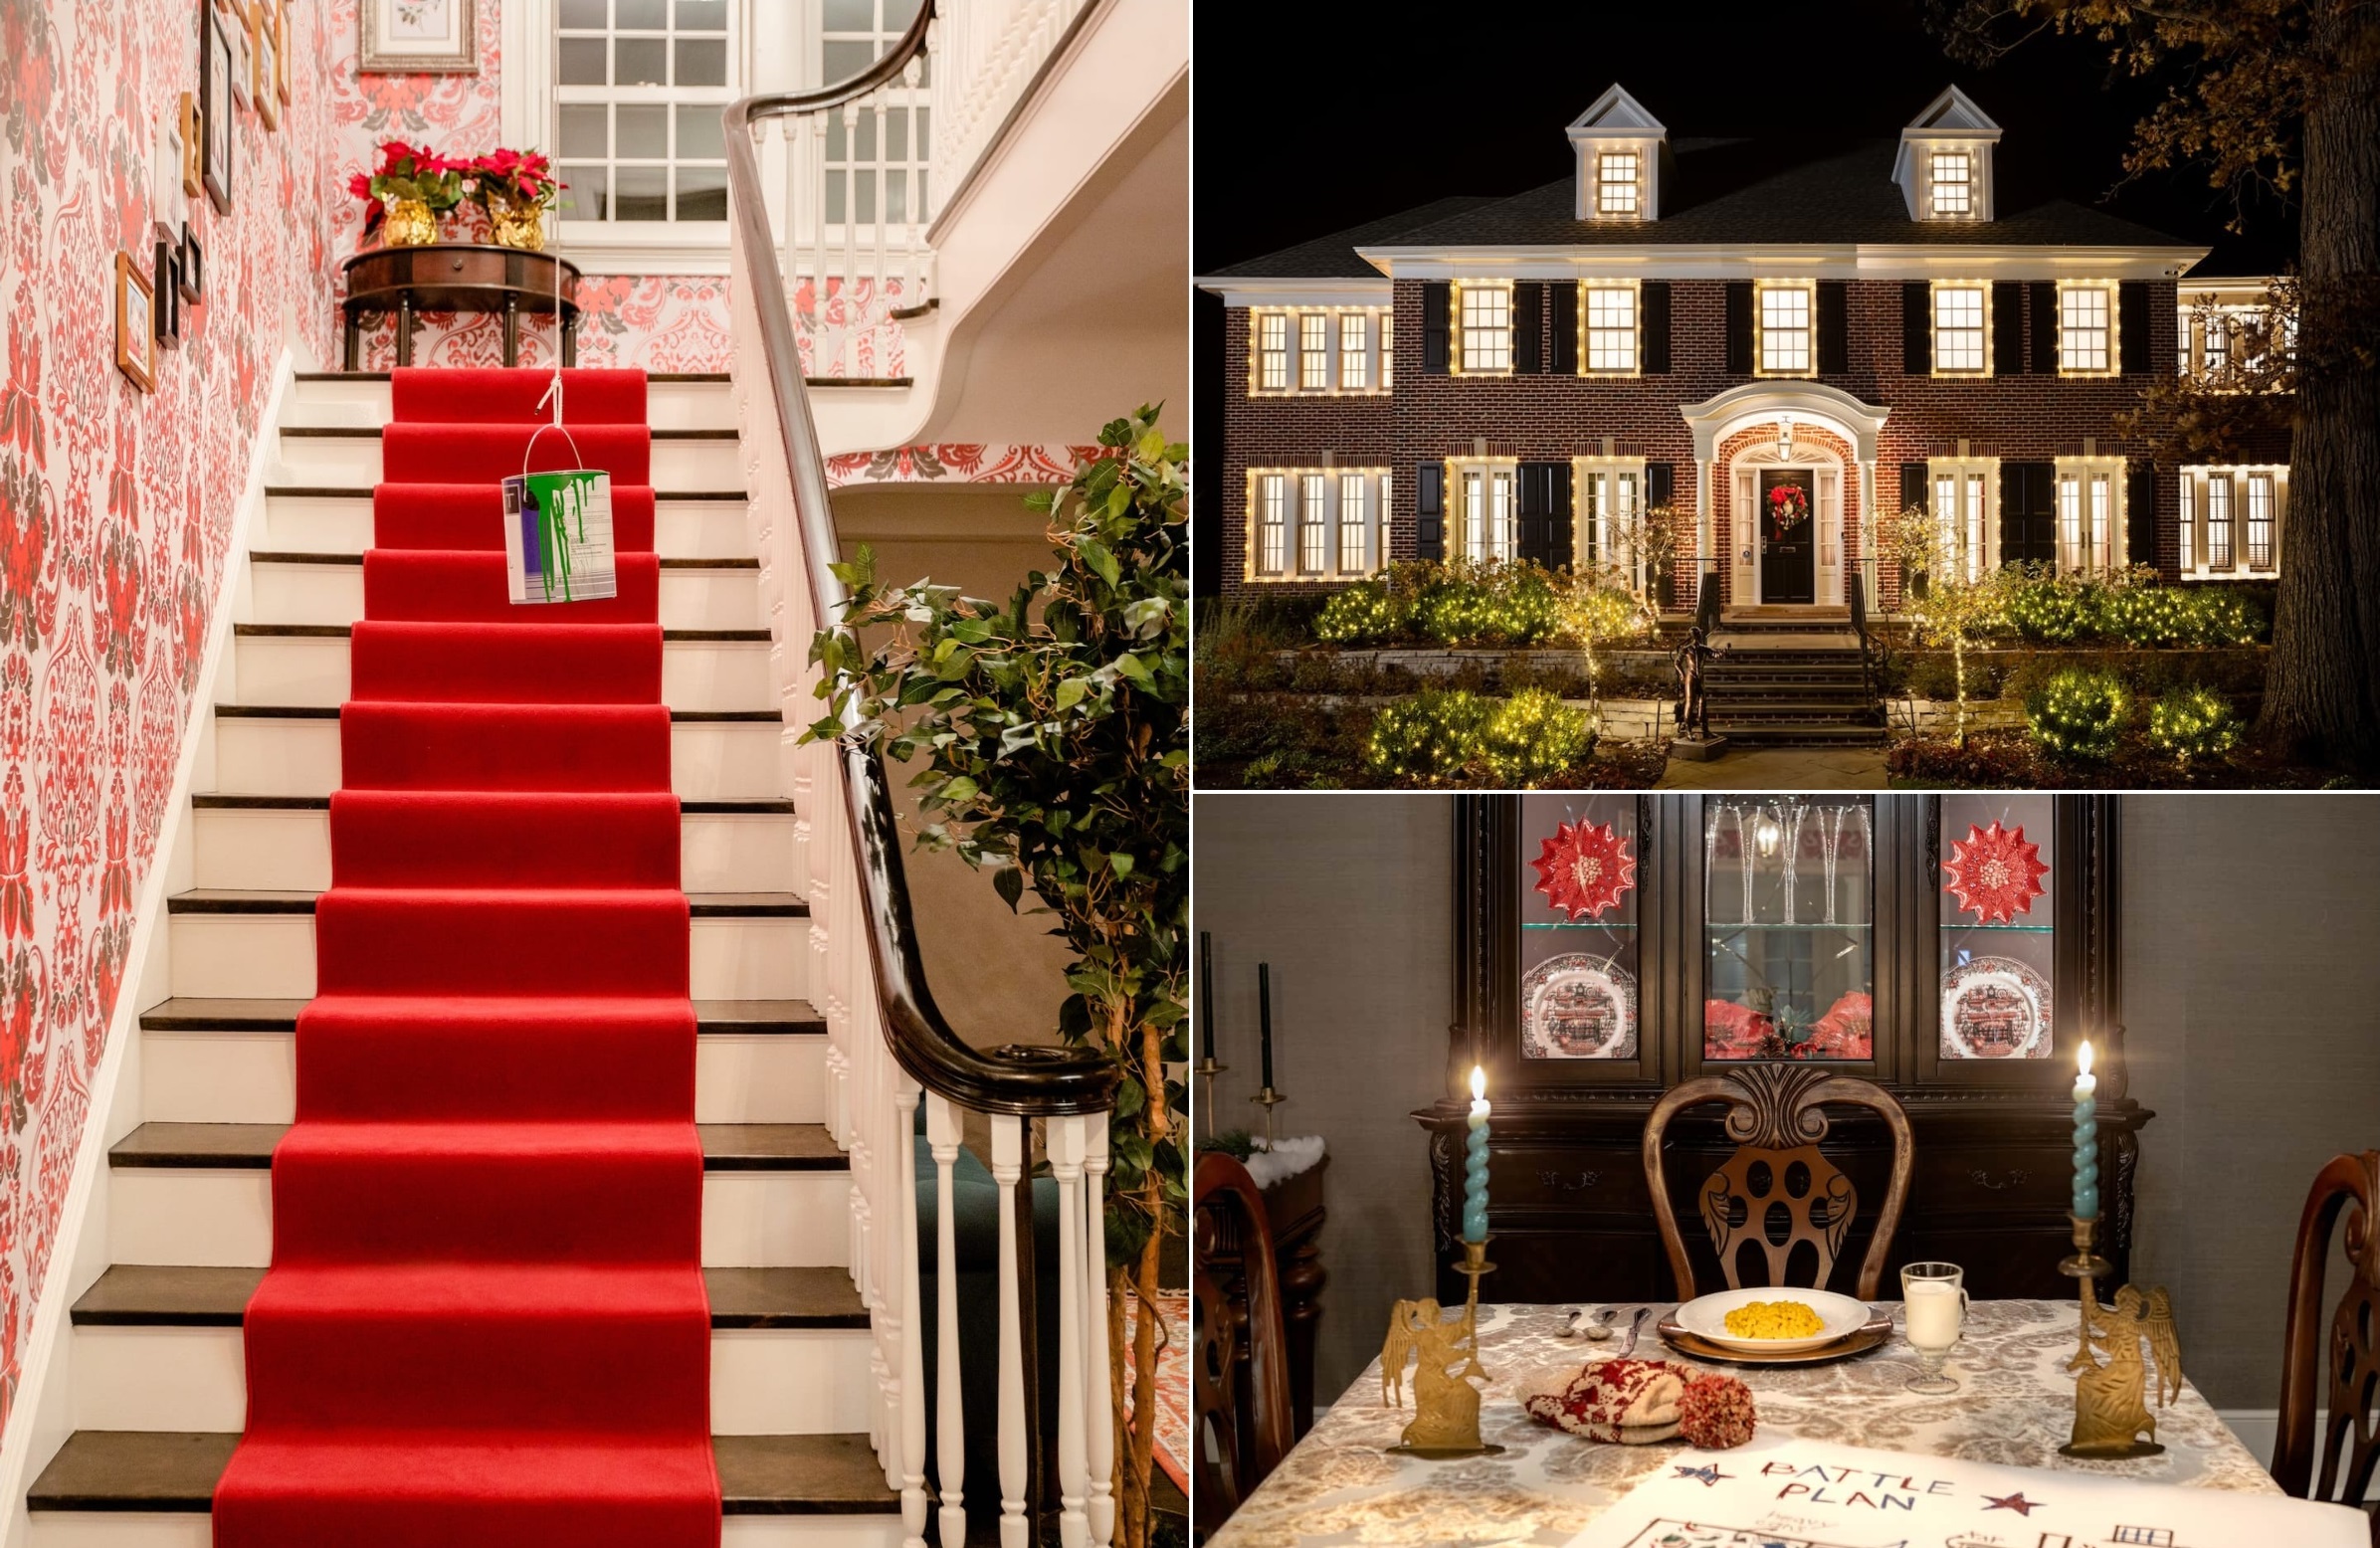 You Can Now Rent The Home Alone House via Airbnb